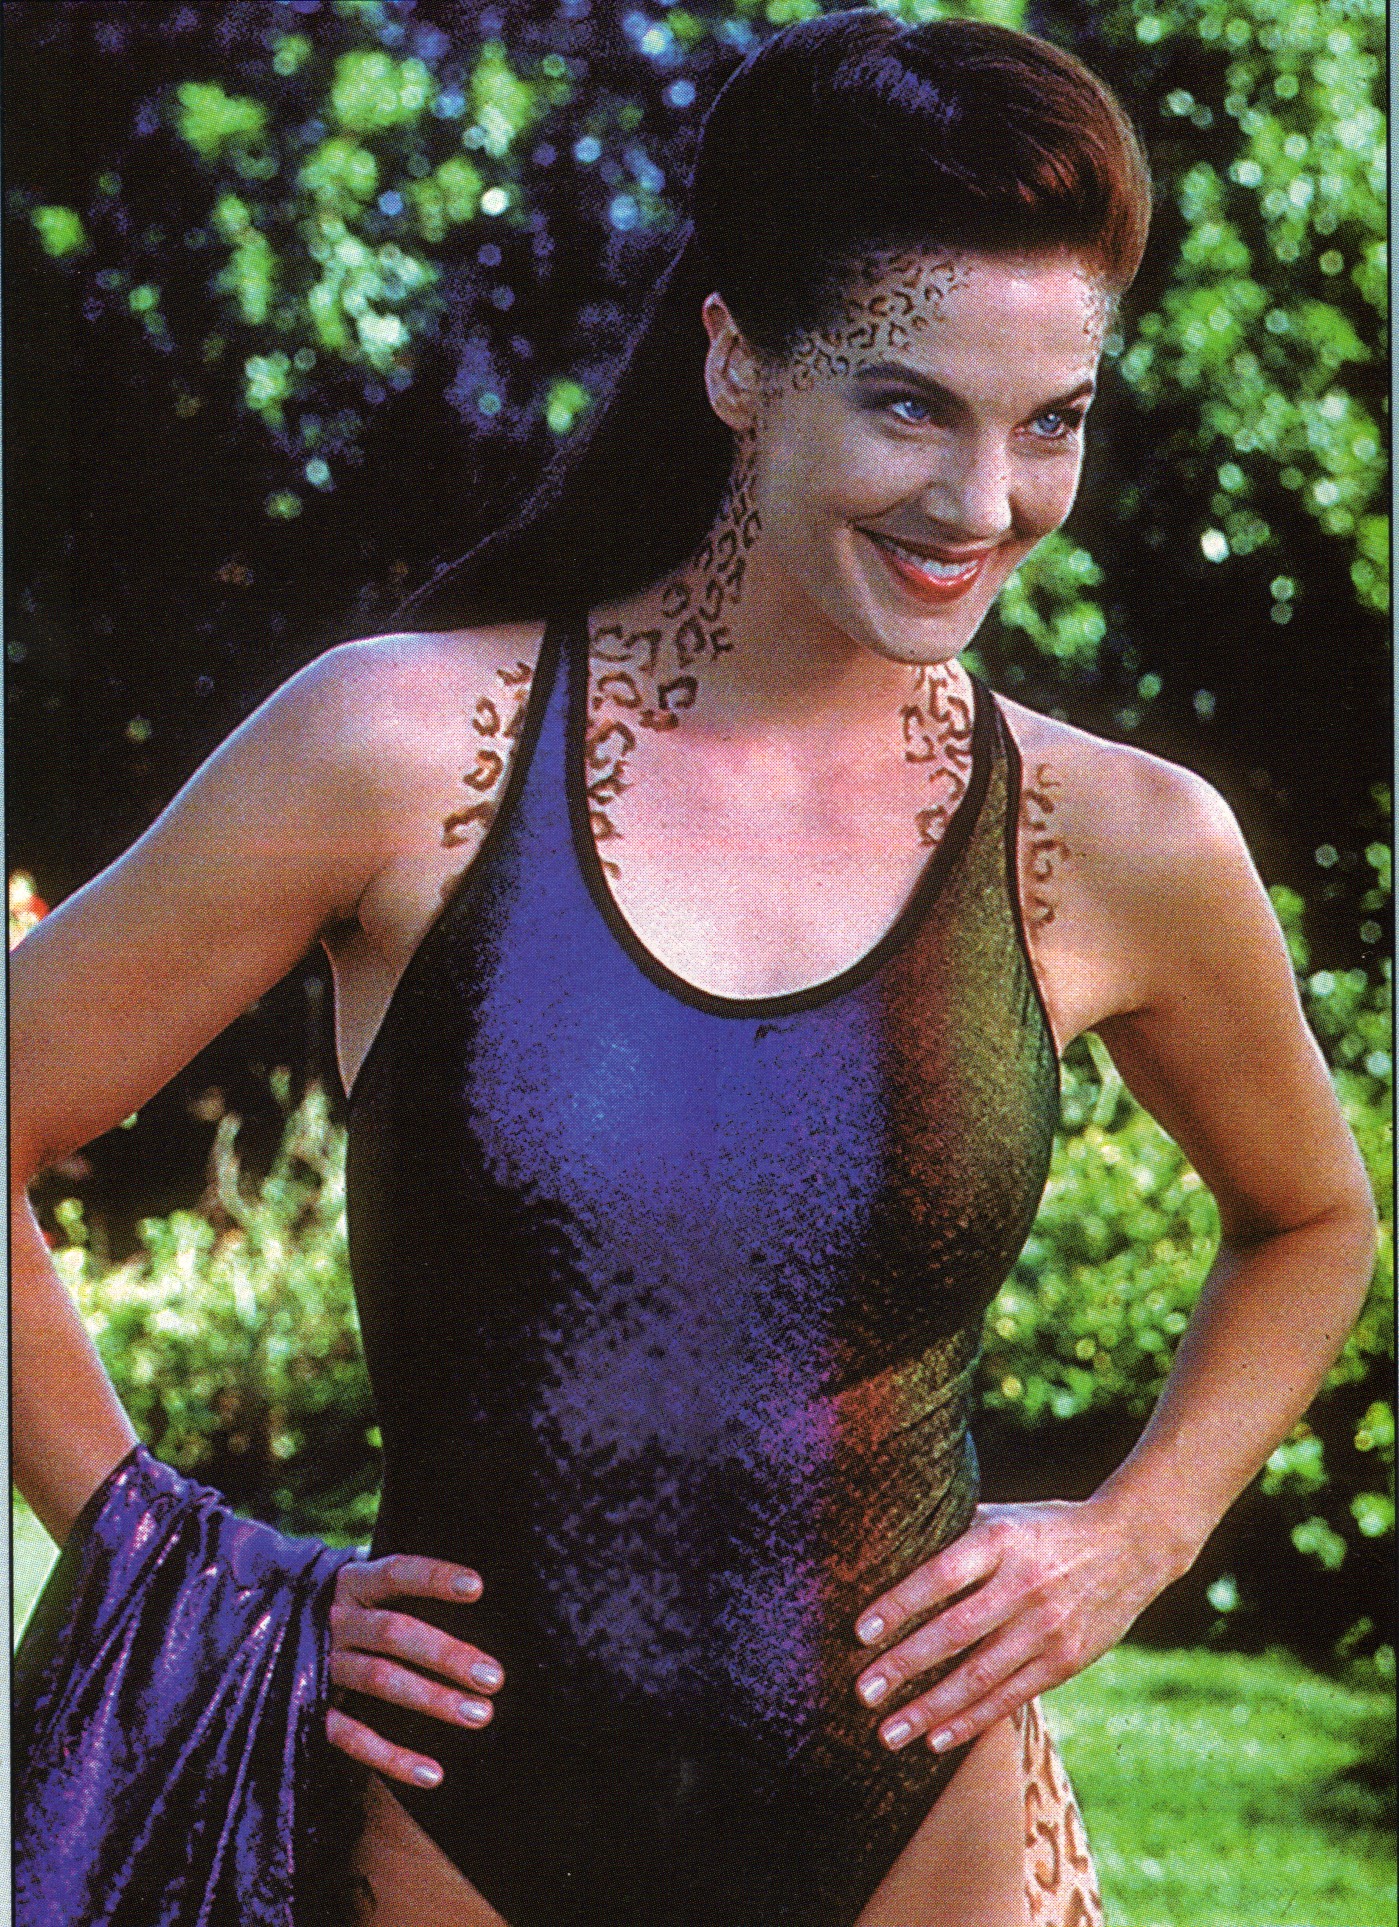 Farrell pictures terry nude Terry Farrell